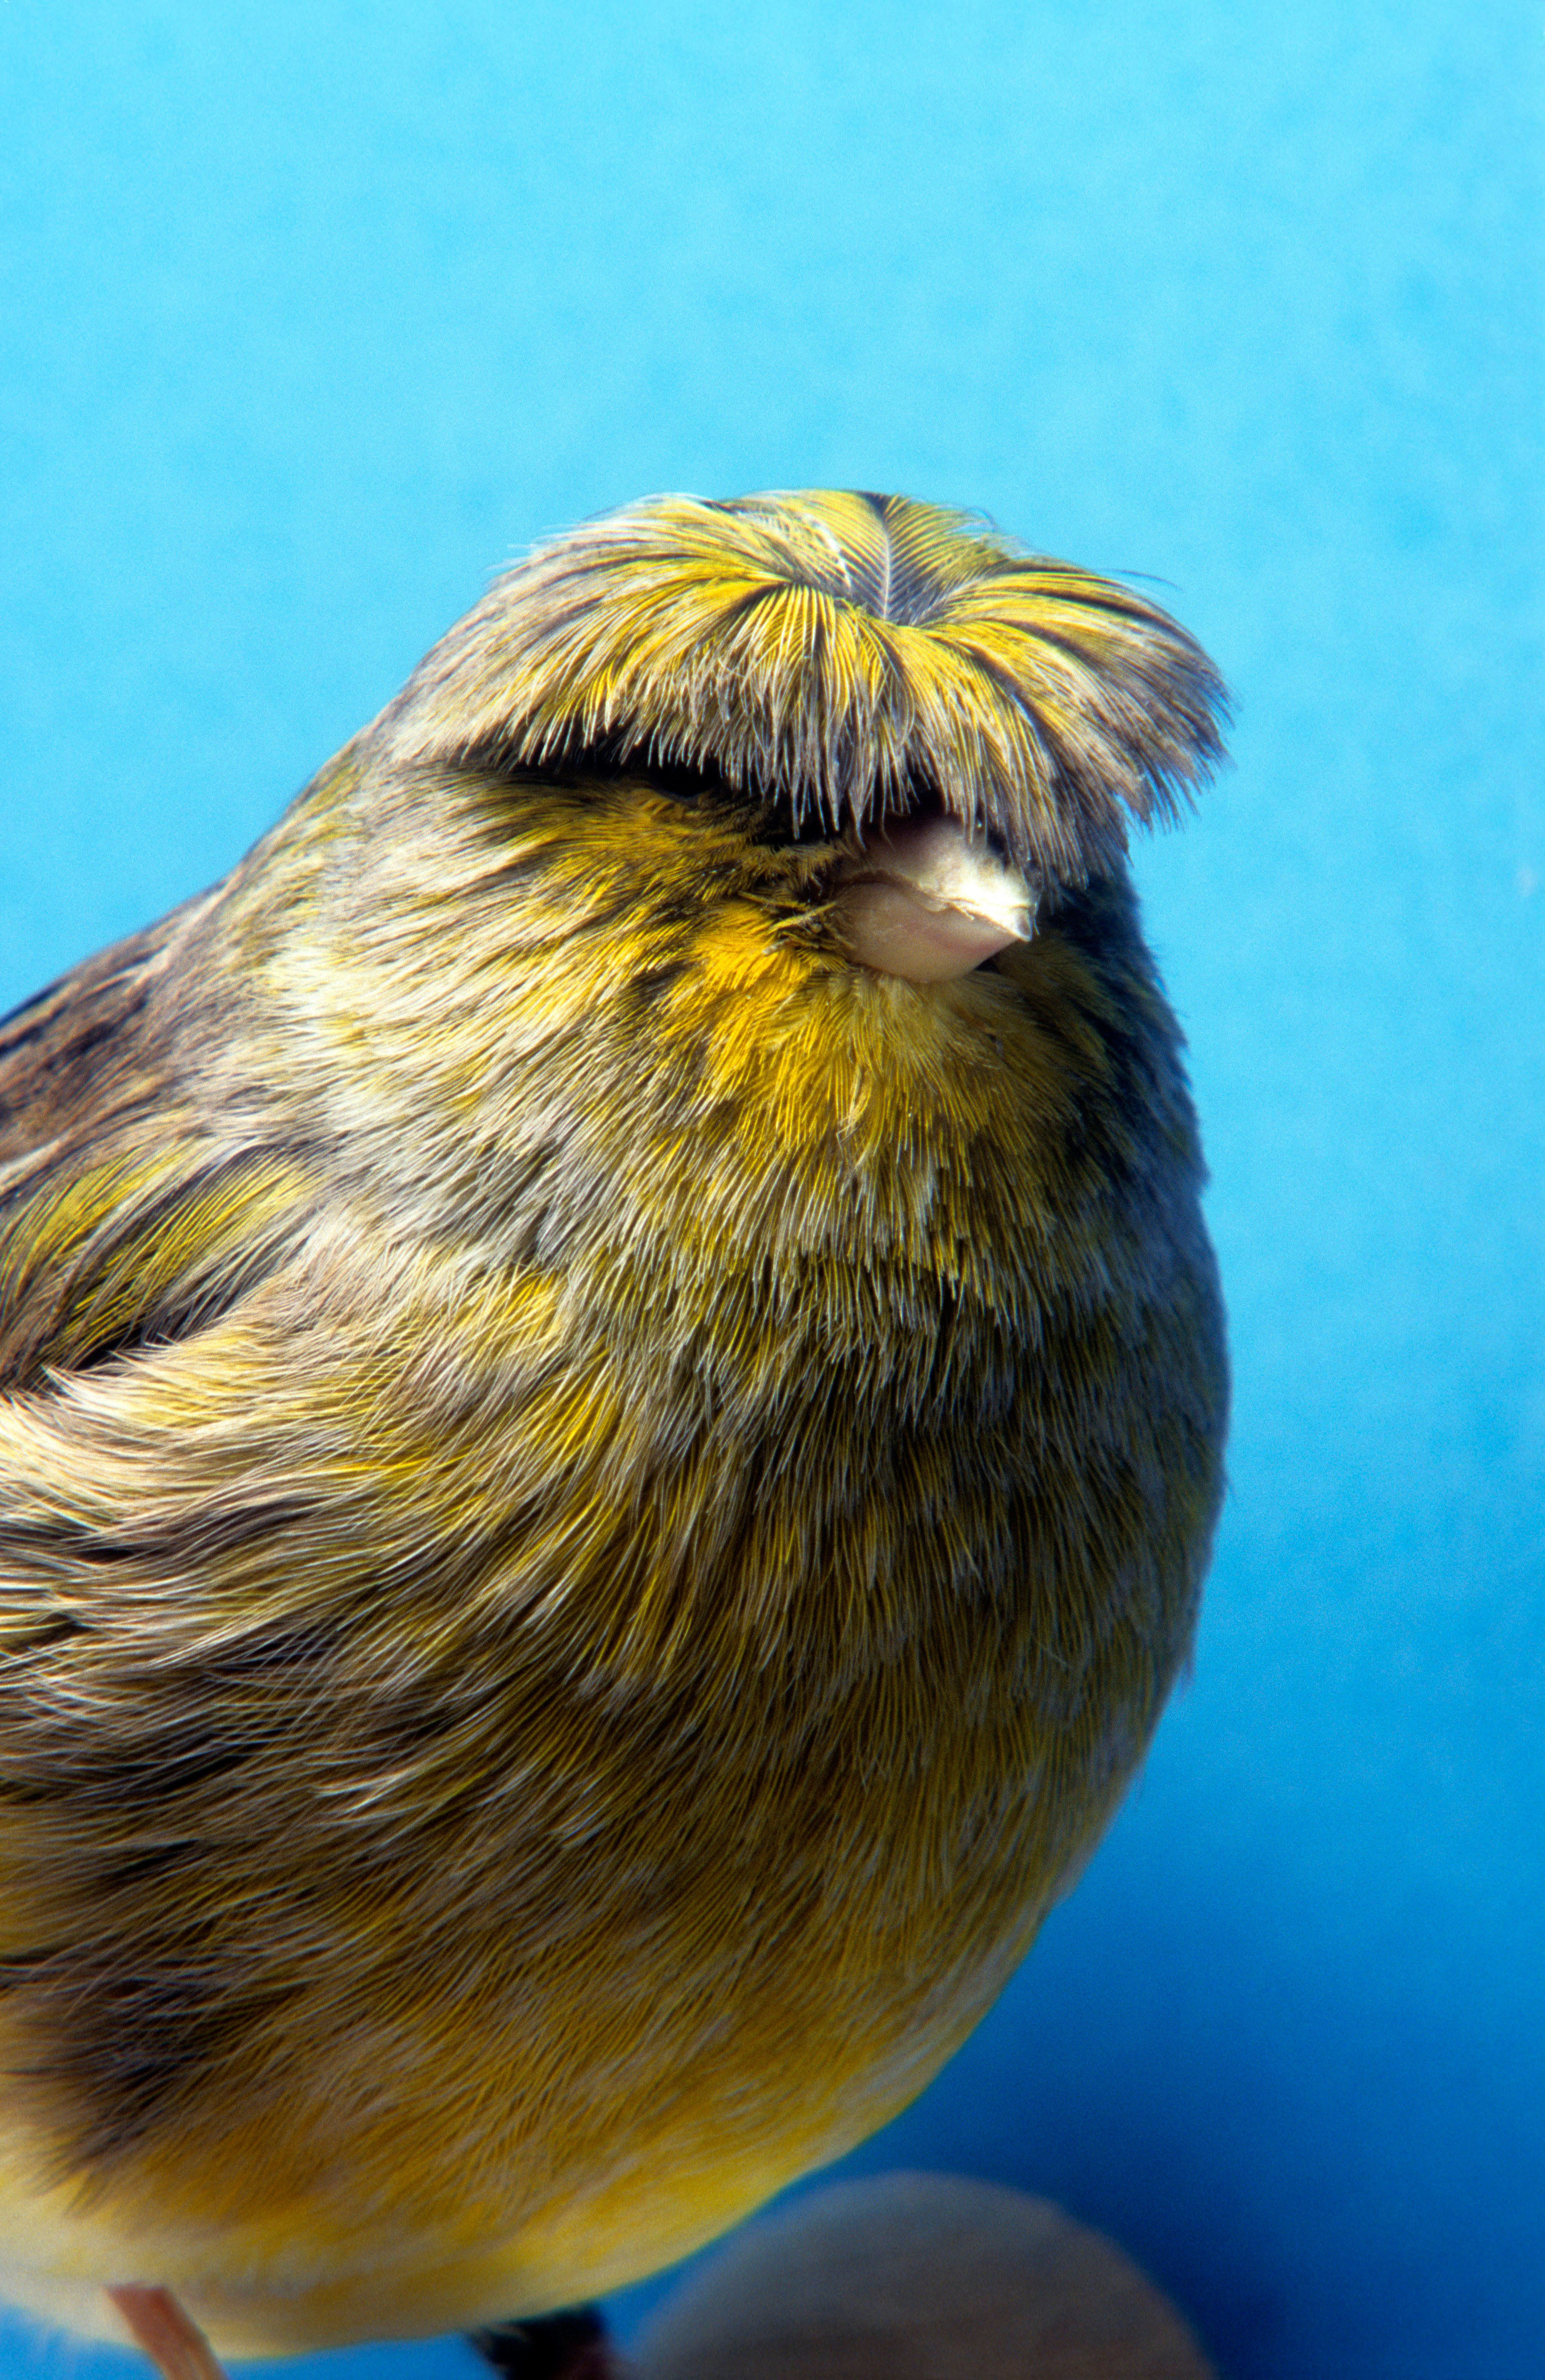 A crested canary